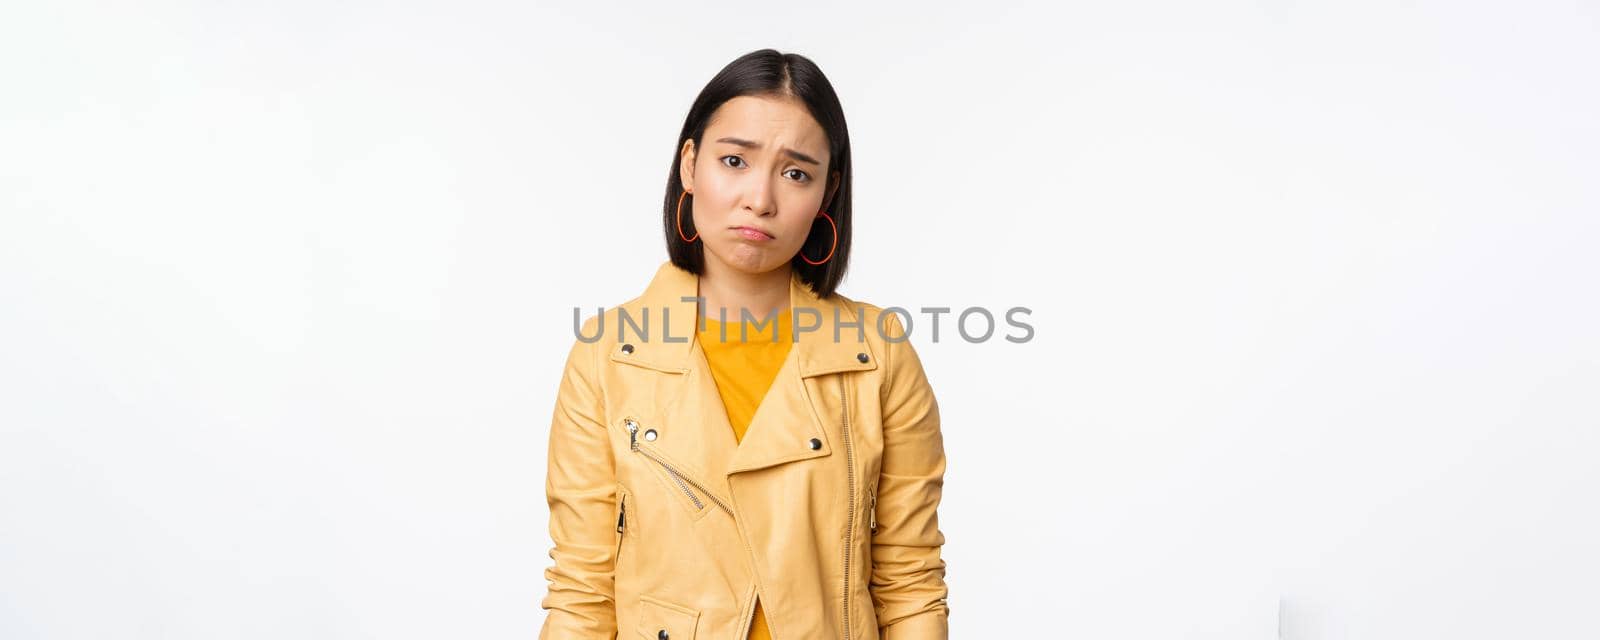 Portrait of sad korean woman sulking, frowning and looking upset, distressed frustrated face expression, standing gloomy against white background.